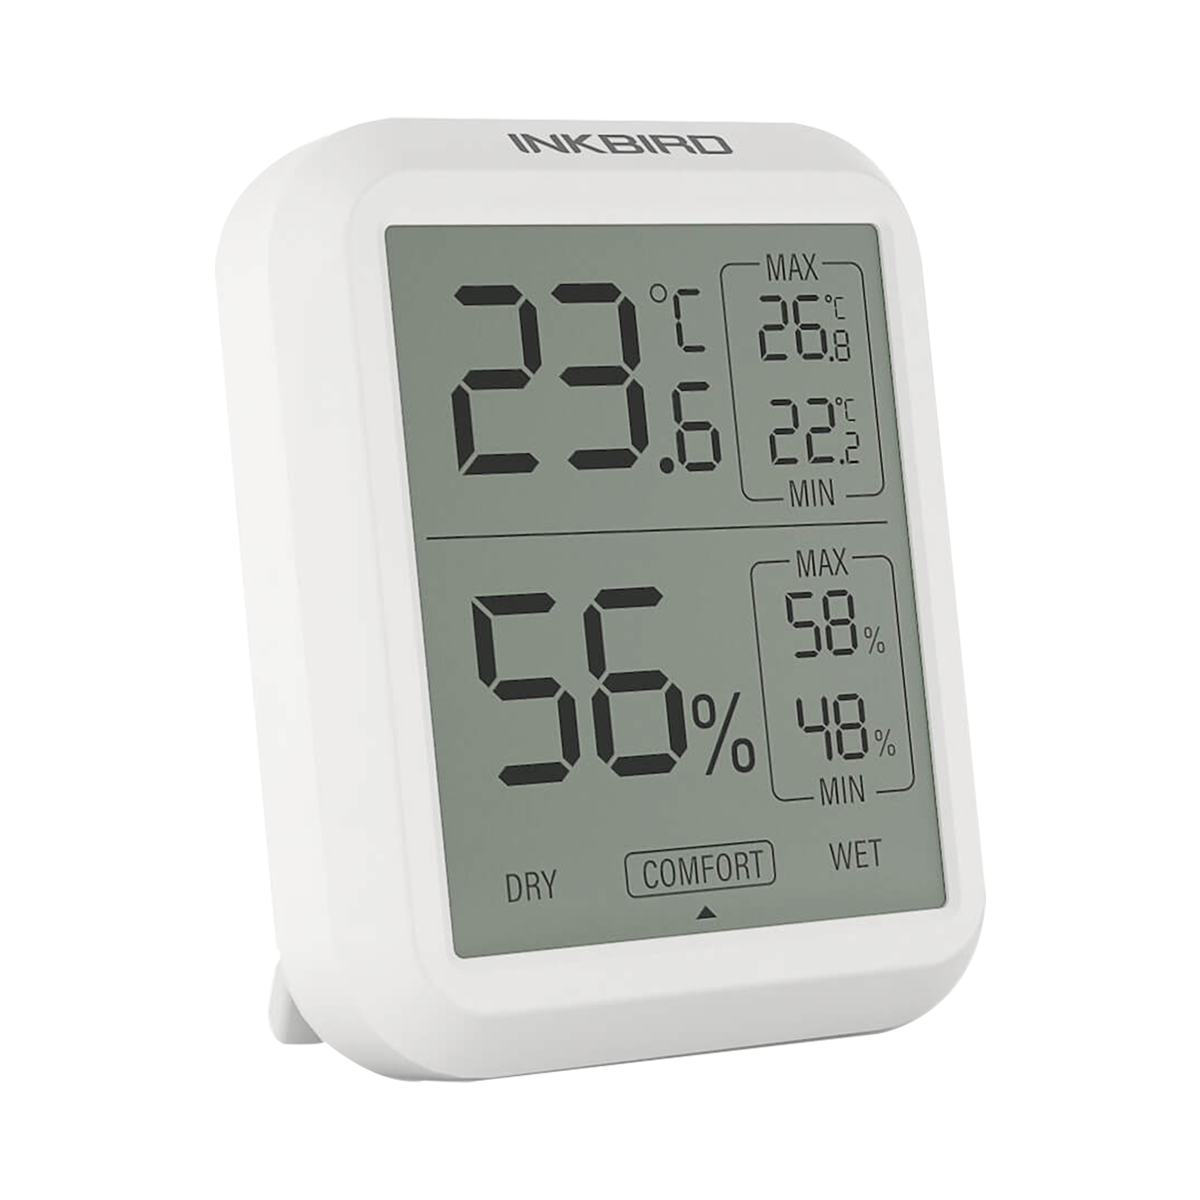 INKBIRD WiFi Thermometer Hygrometer, Temperature and Humidity Sensor with  Weather Station, 8-in-1 IBS-TH5 with Electronic Ink Display, 2 Years Free